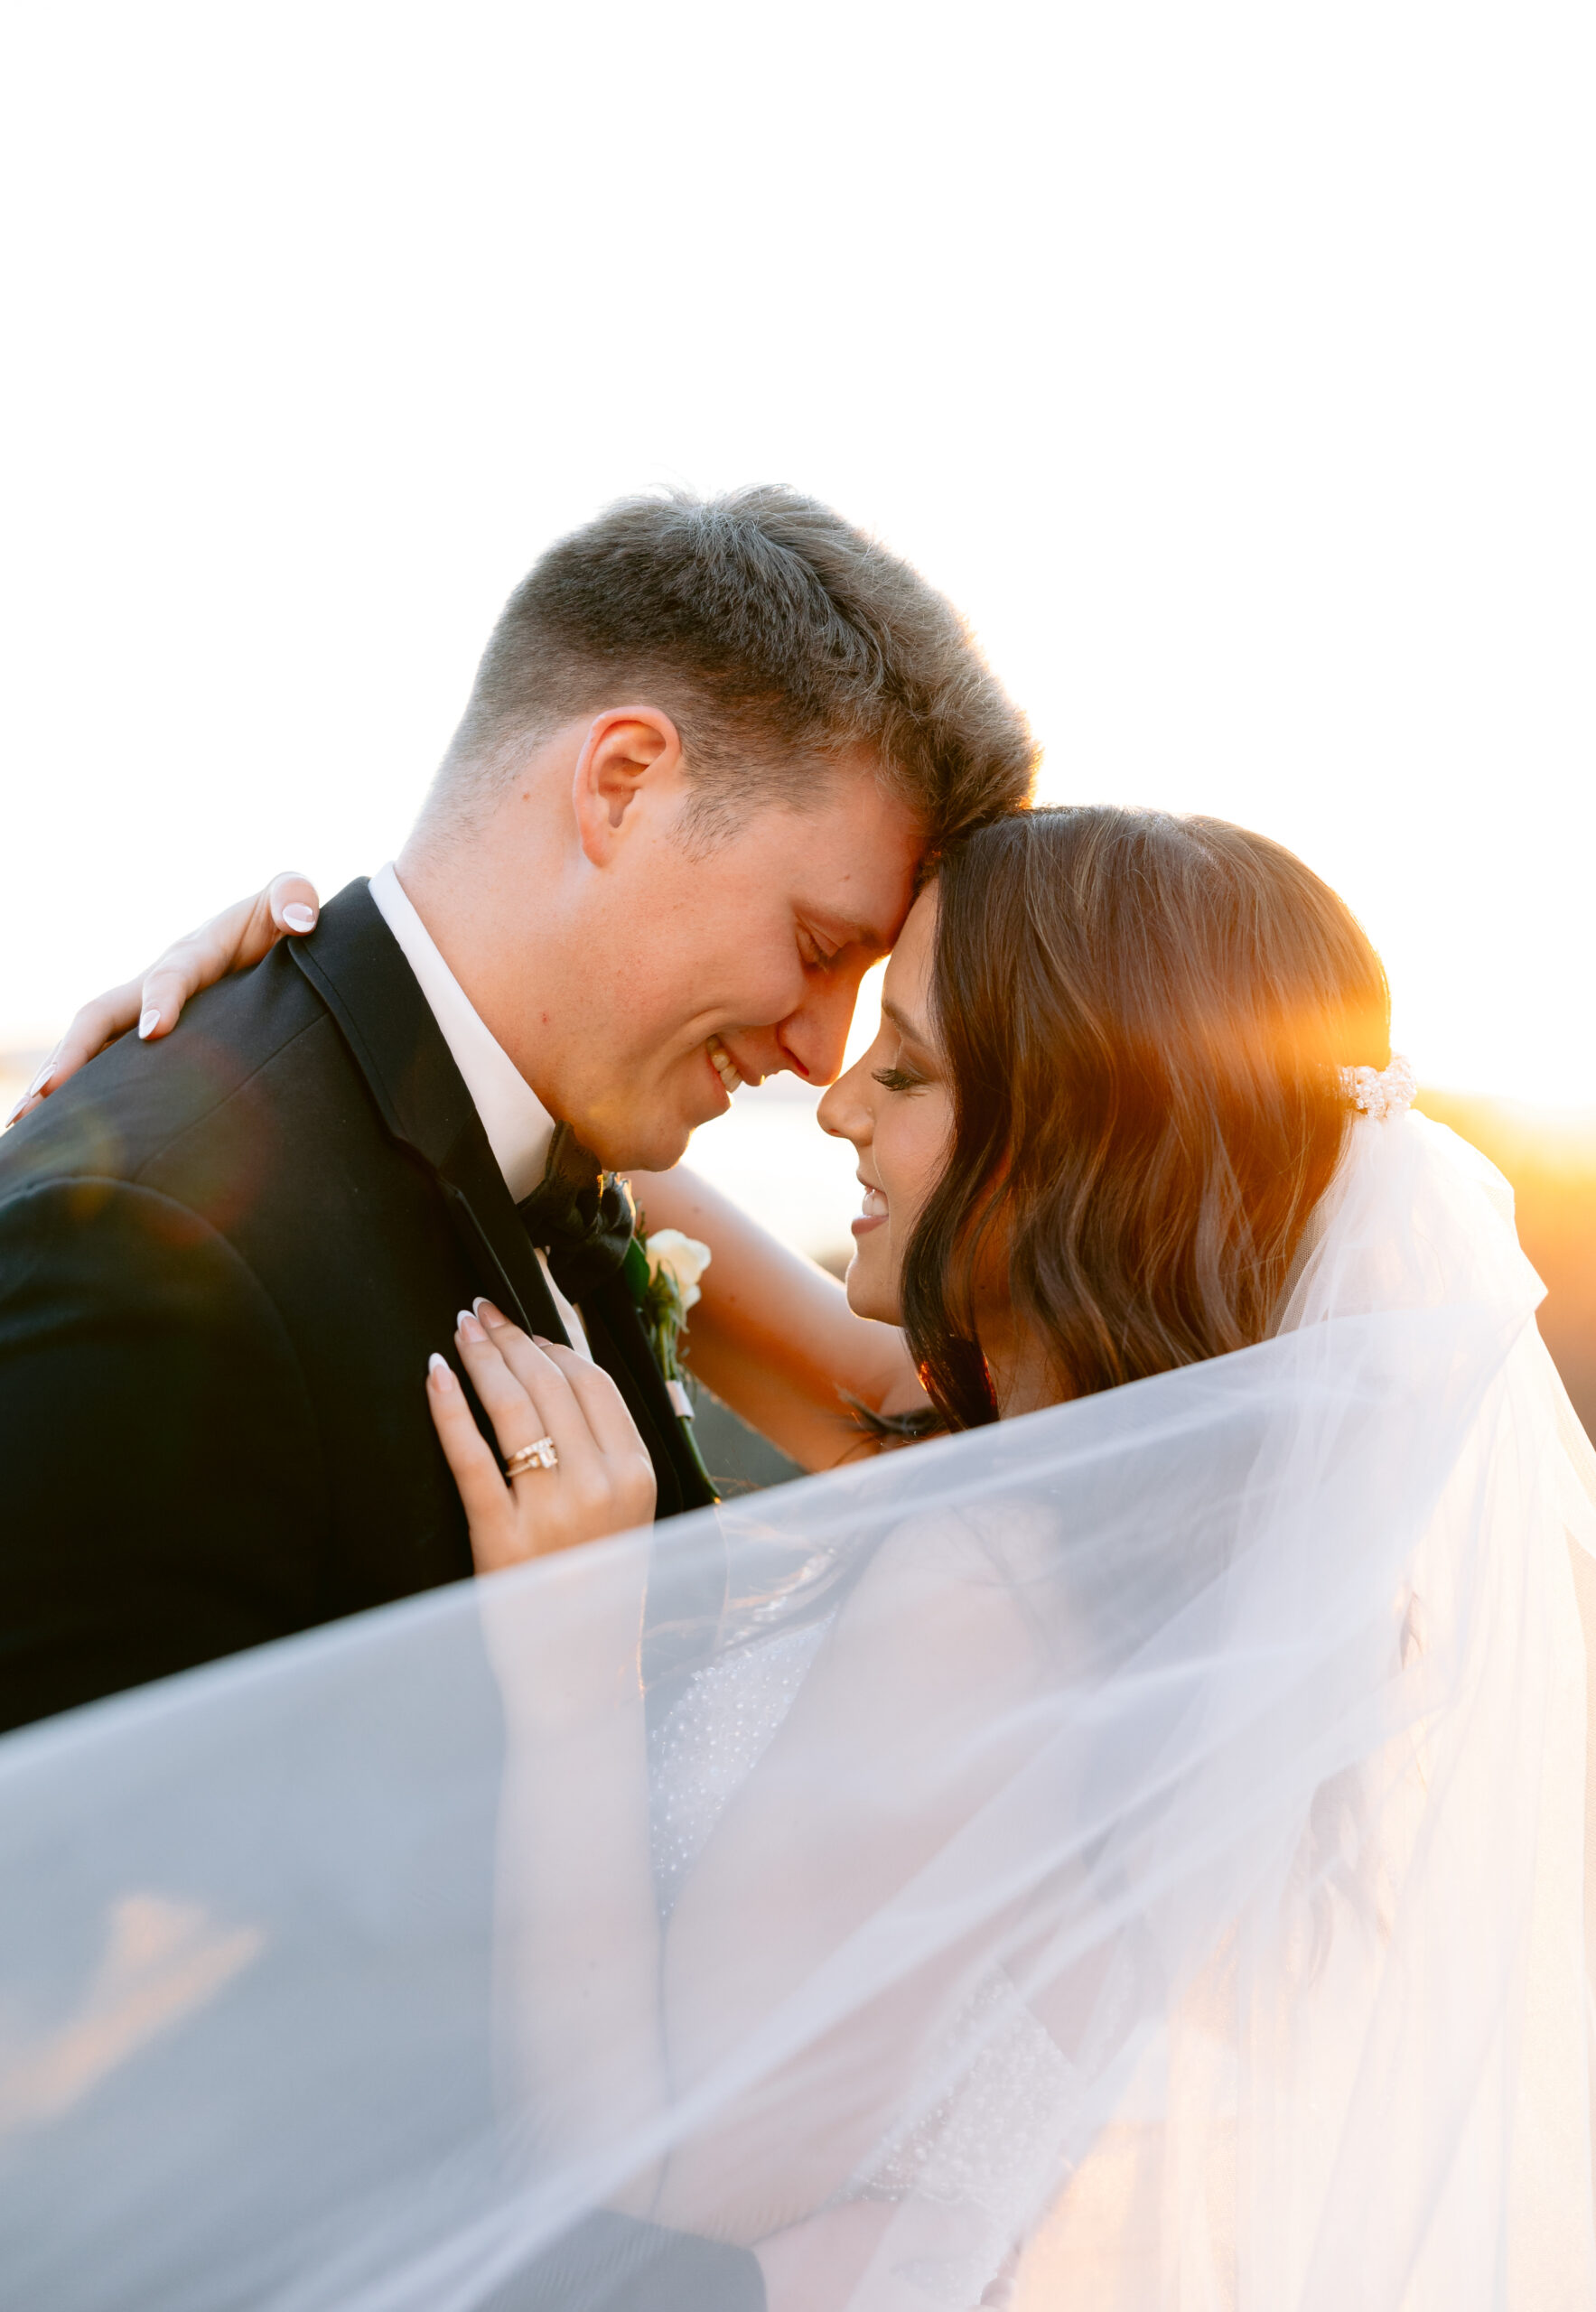 Bride and groom close-up golden hour portrait photographed by Tatyana Zadorin Photography. Springfield MO wedding photography